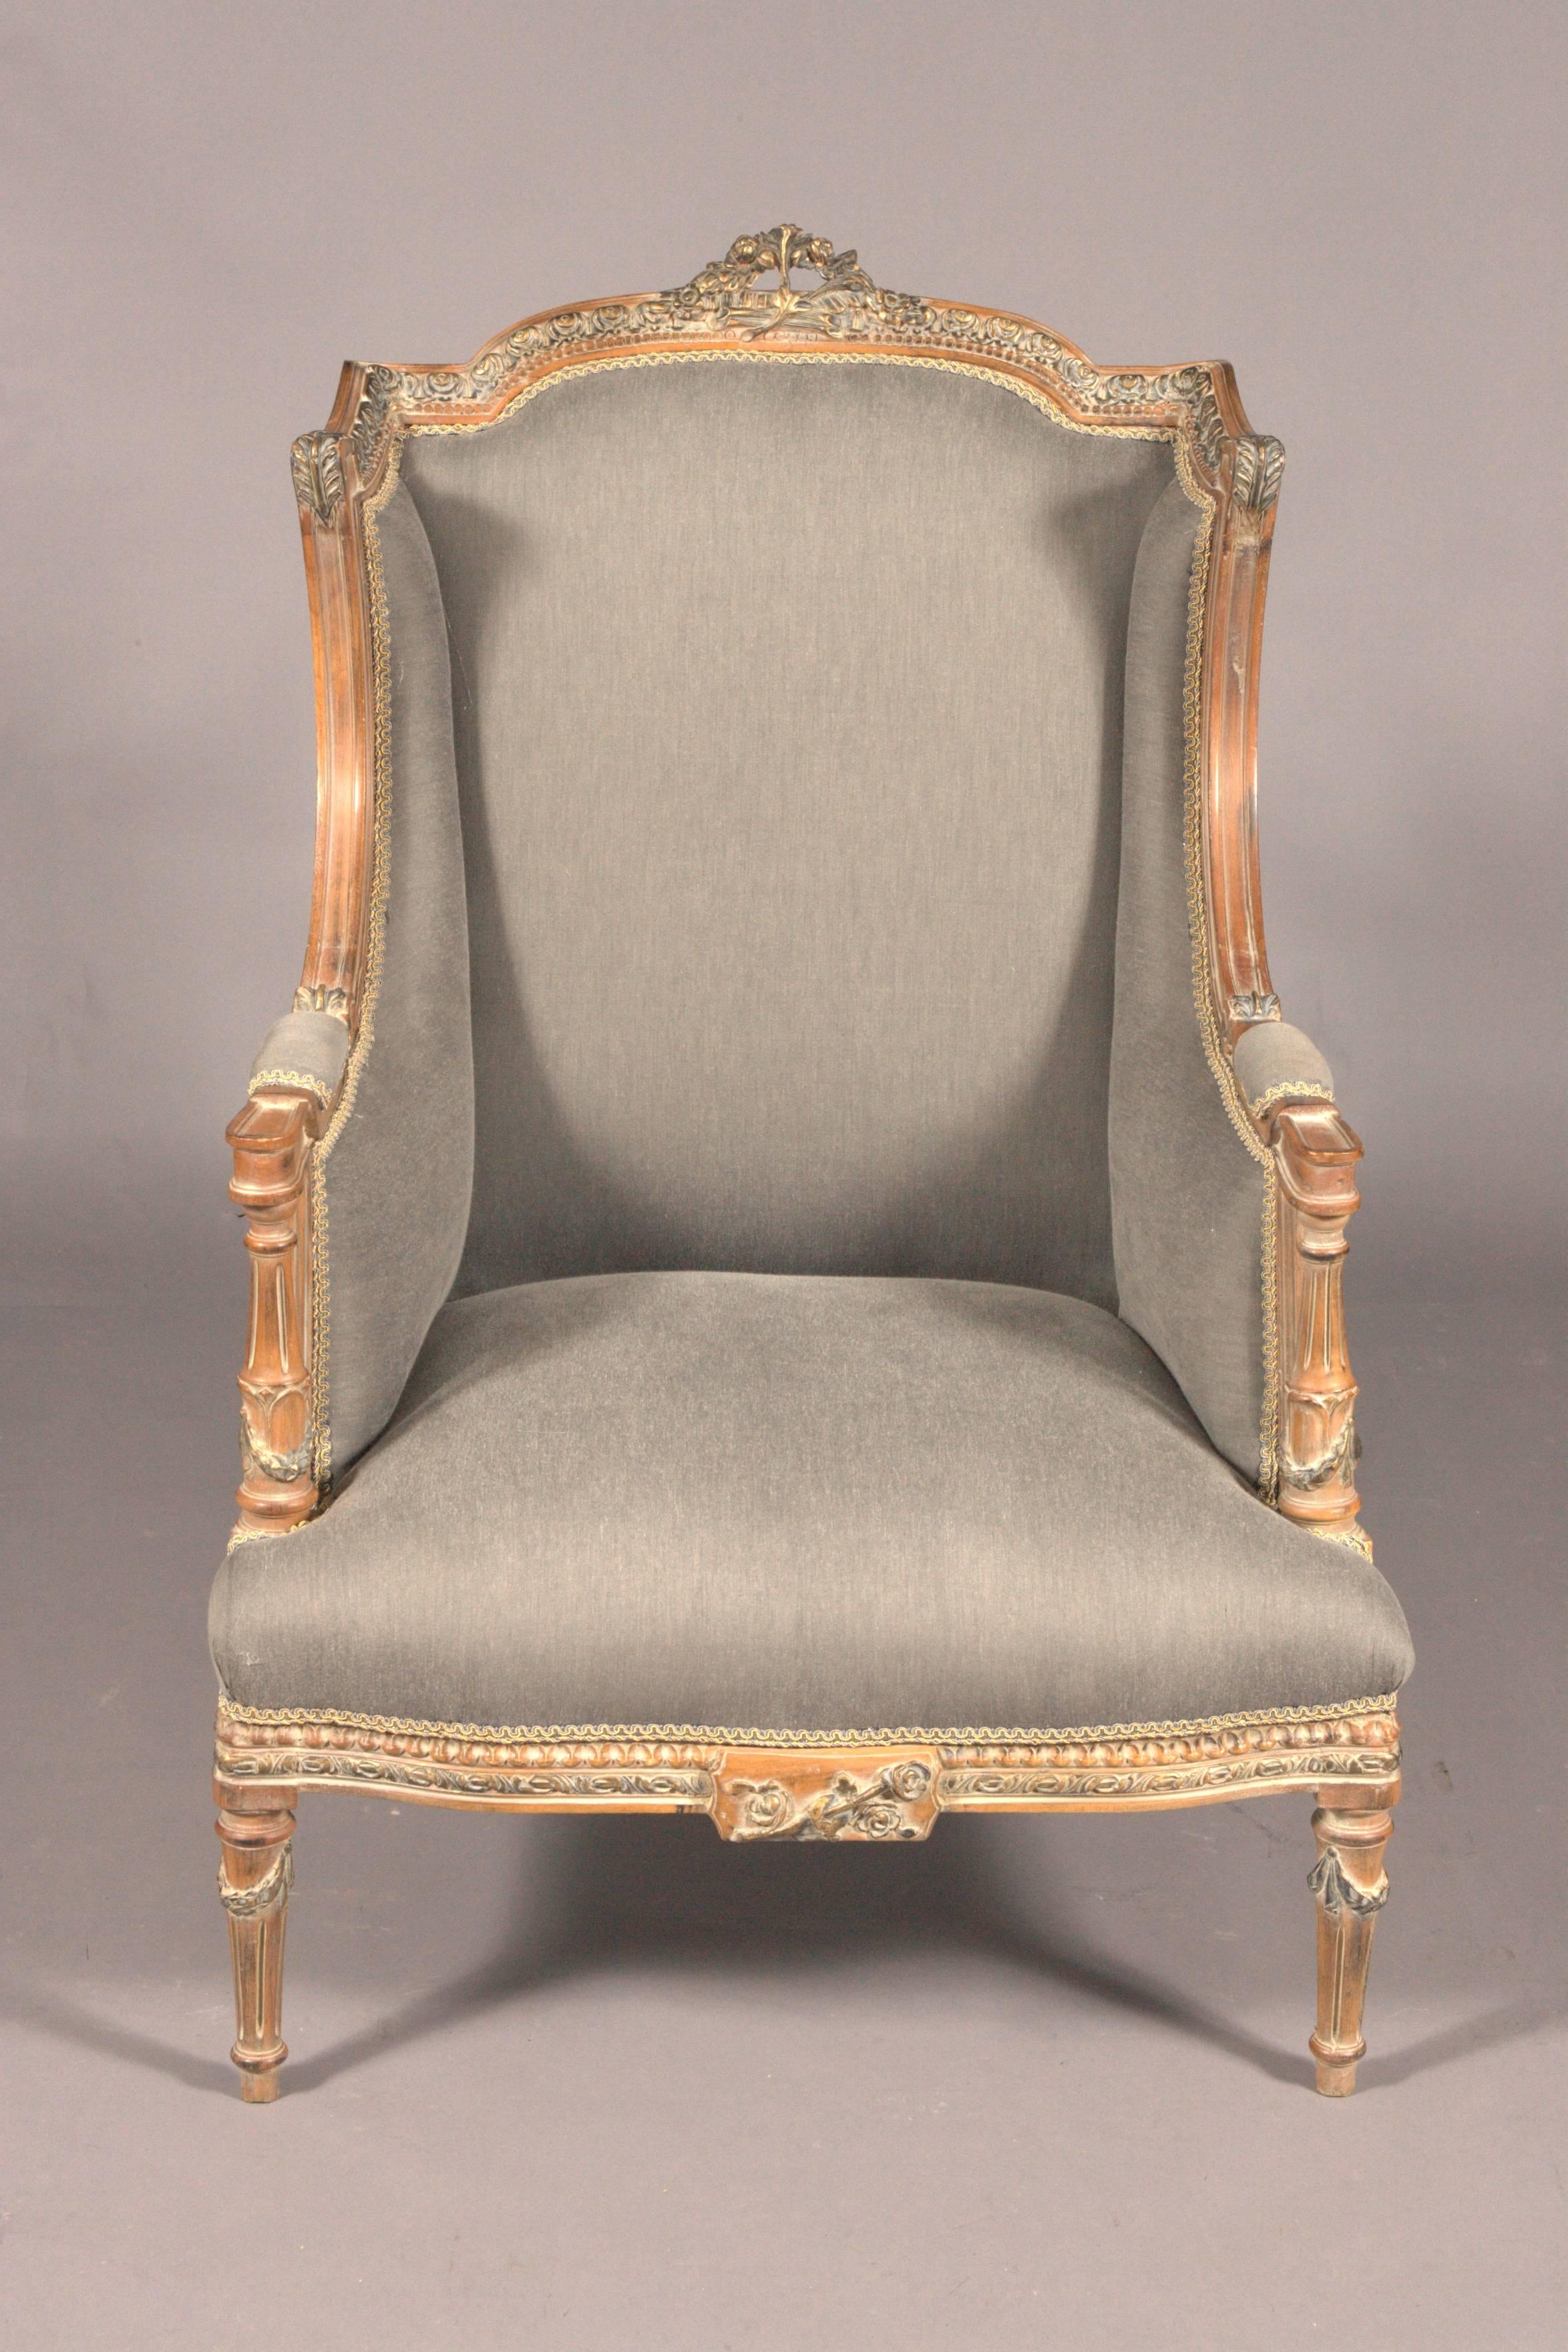 20th Century Classic Seating Set of Three Pieces in the Louis XVI Style (20. Jahrhundert)